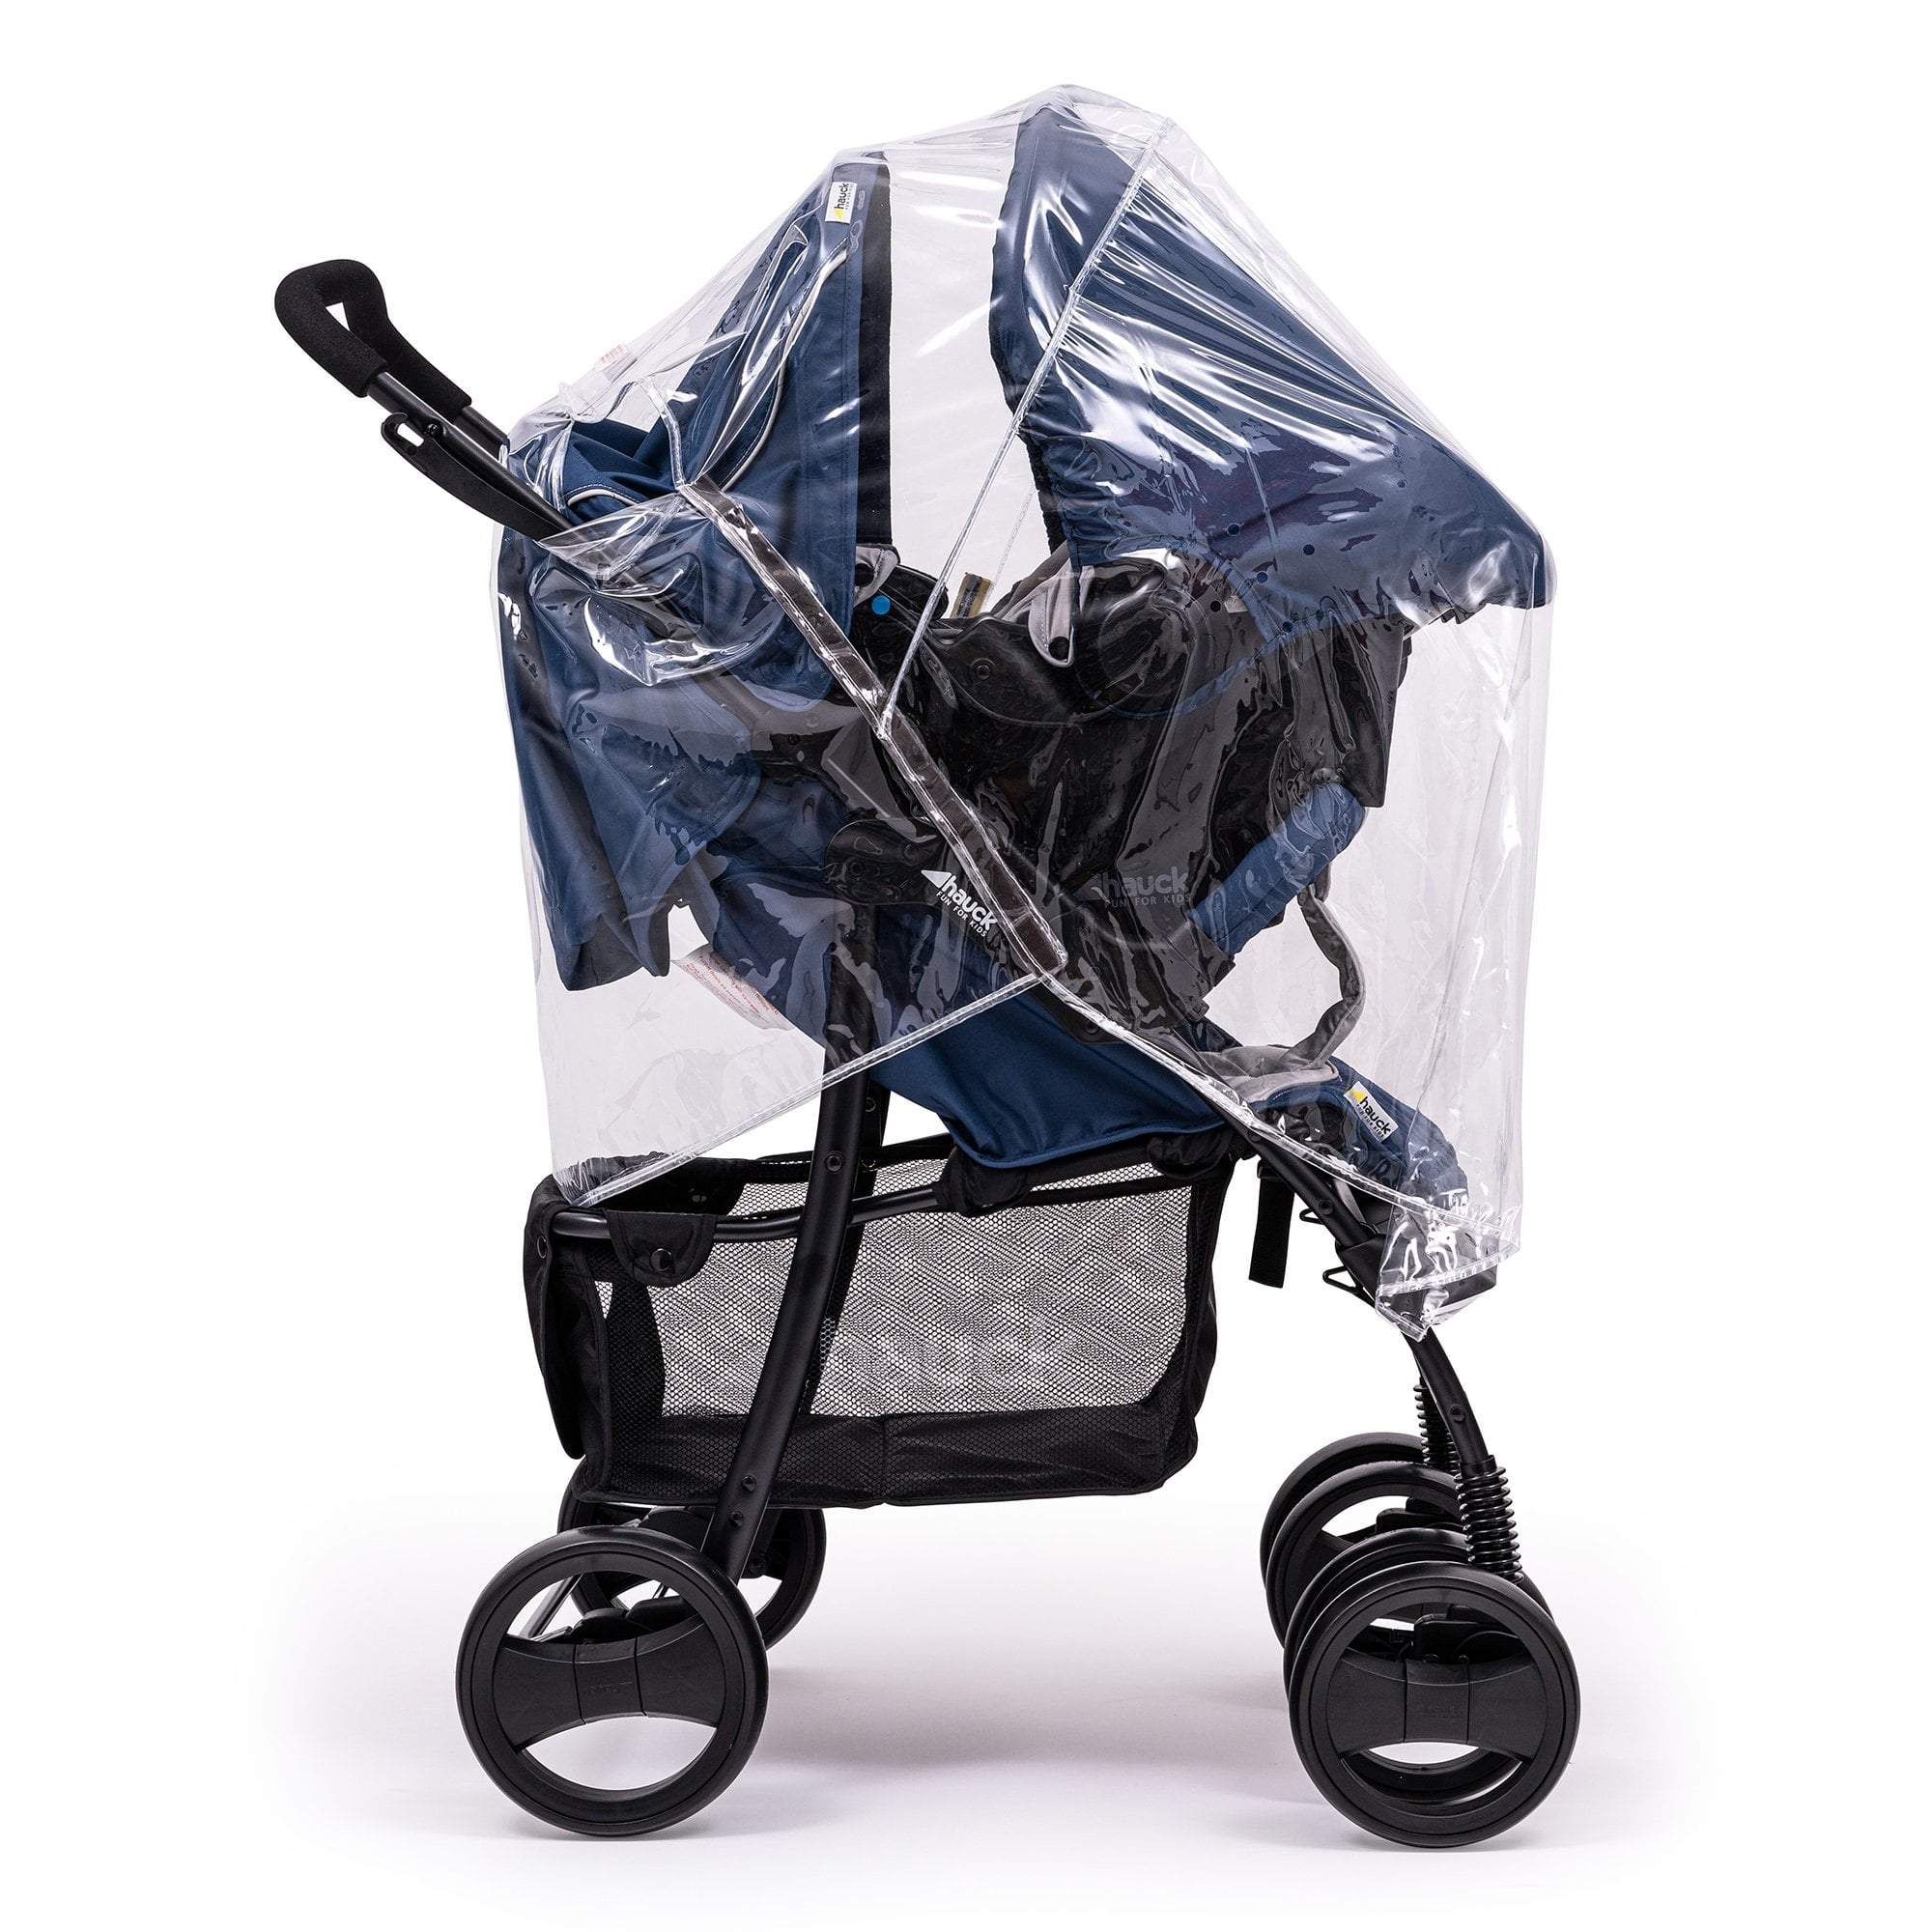 Travel System Raincover Compatible with Baby Jogger - Fits All Models - For Your Little One